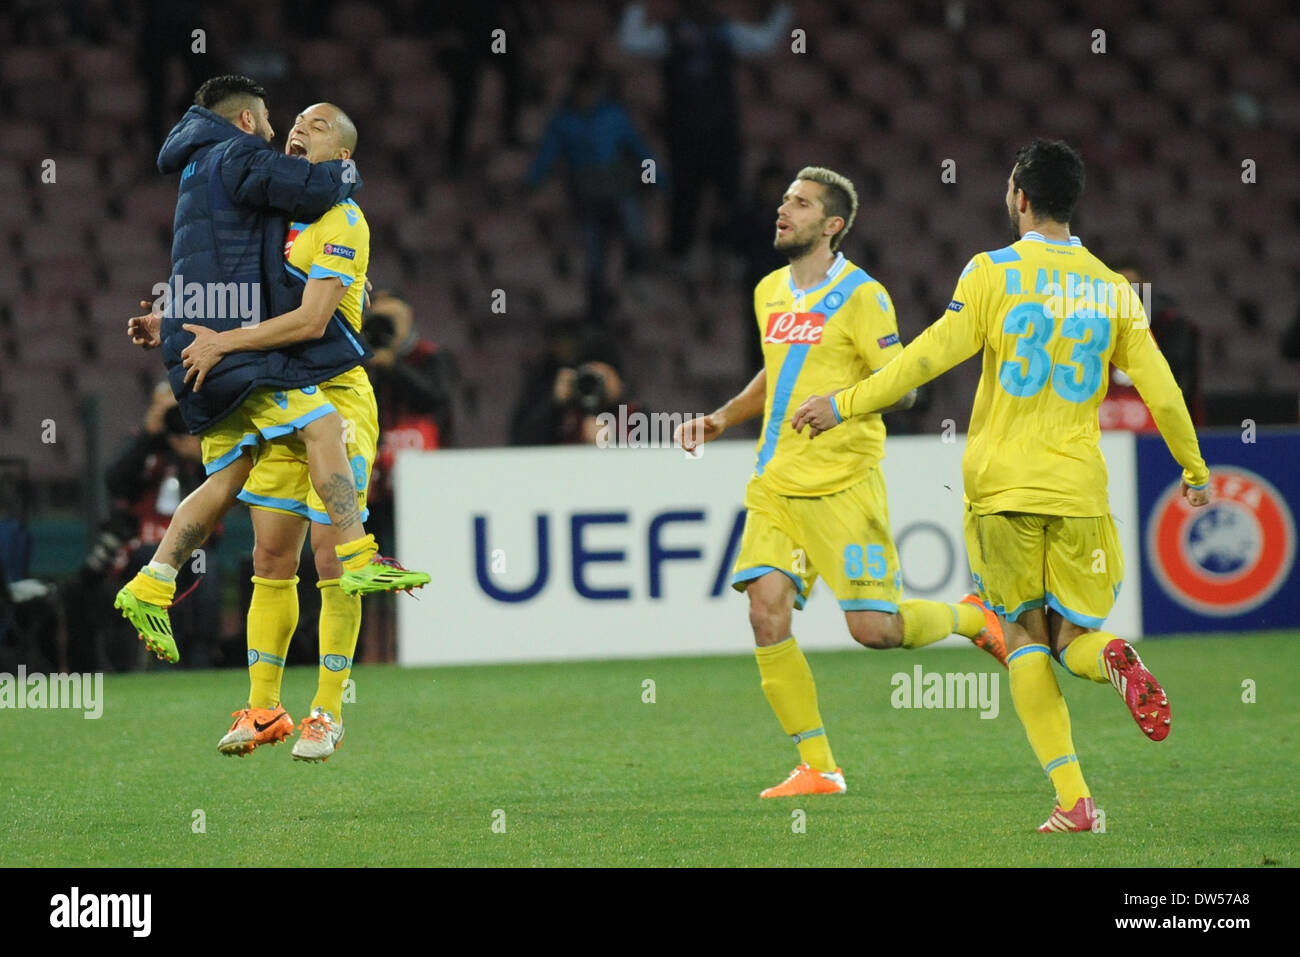 Naples, Italy. 27th Feb, 2014. Gokhan Inler celebrates after scoring during the UEFA Europa League Round of 32 Second Leg match between SSC Napoli and Swansea City Football / Soccer at Stadio San Paolo on February 27, 2014 in Naples, Italy. Credit:  Franco Romano/NurPhoto/ZUMAPRESS.com/Alamy Live News Stock Photo